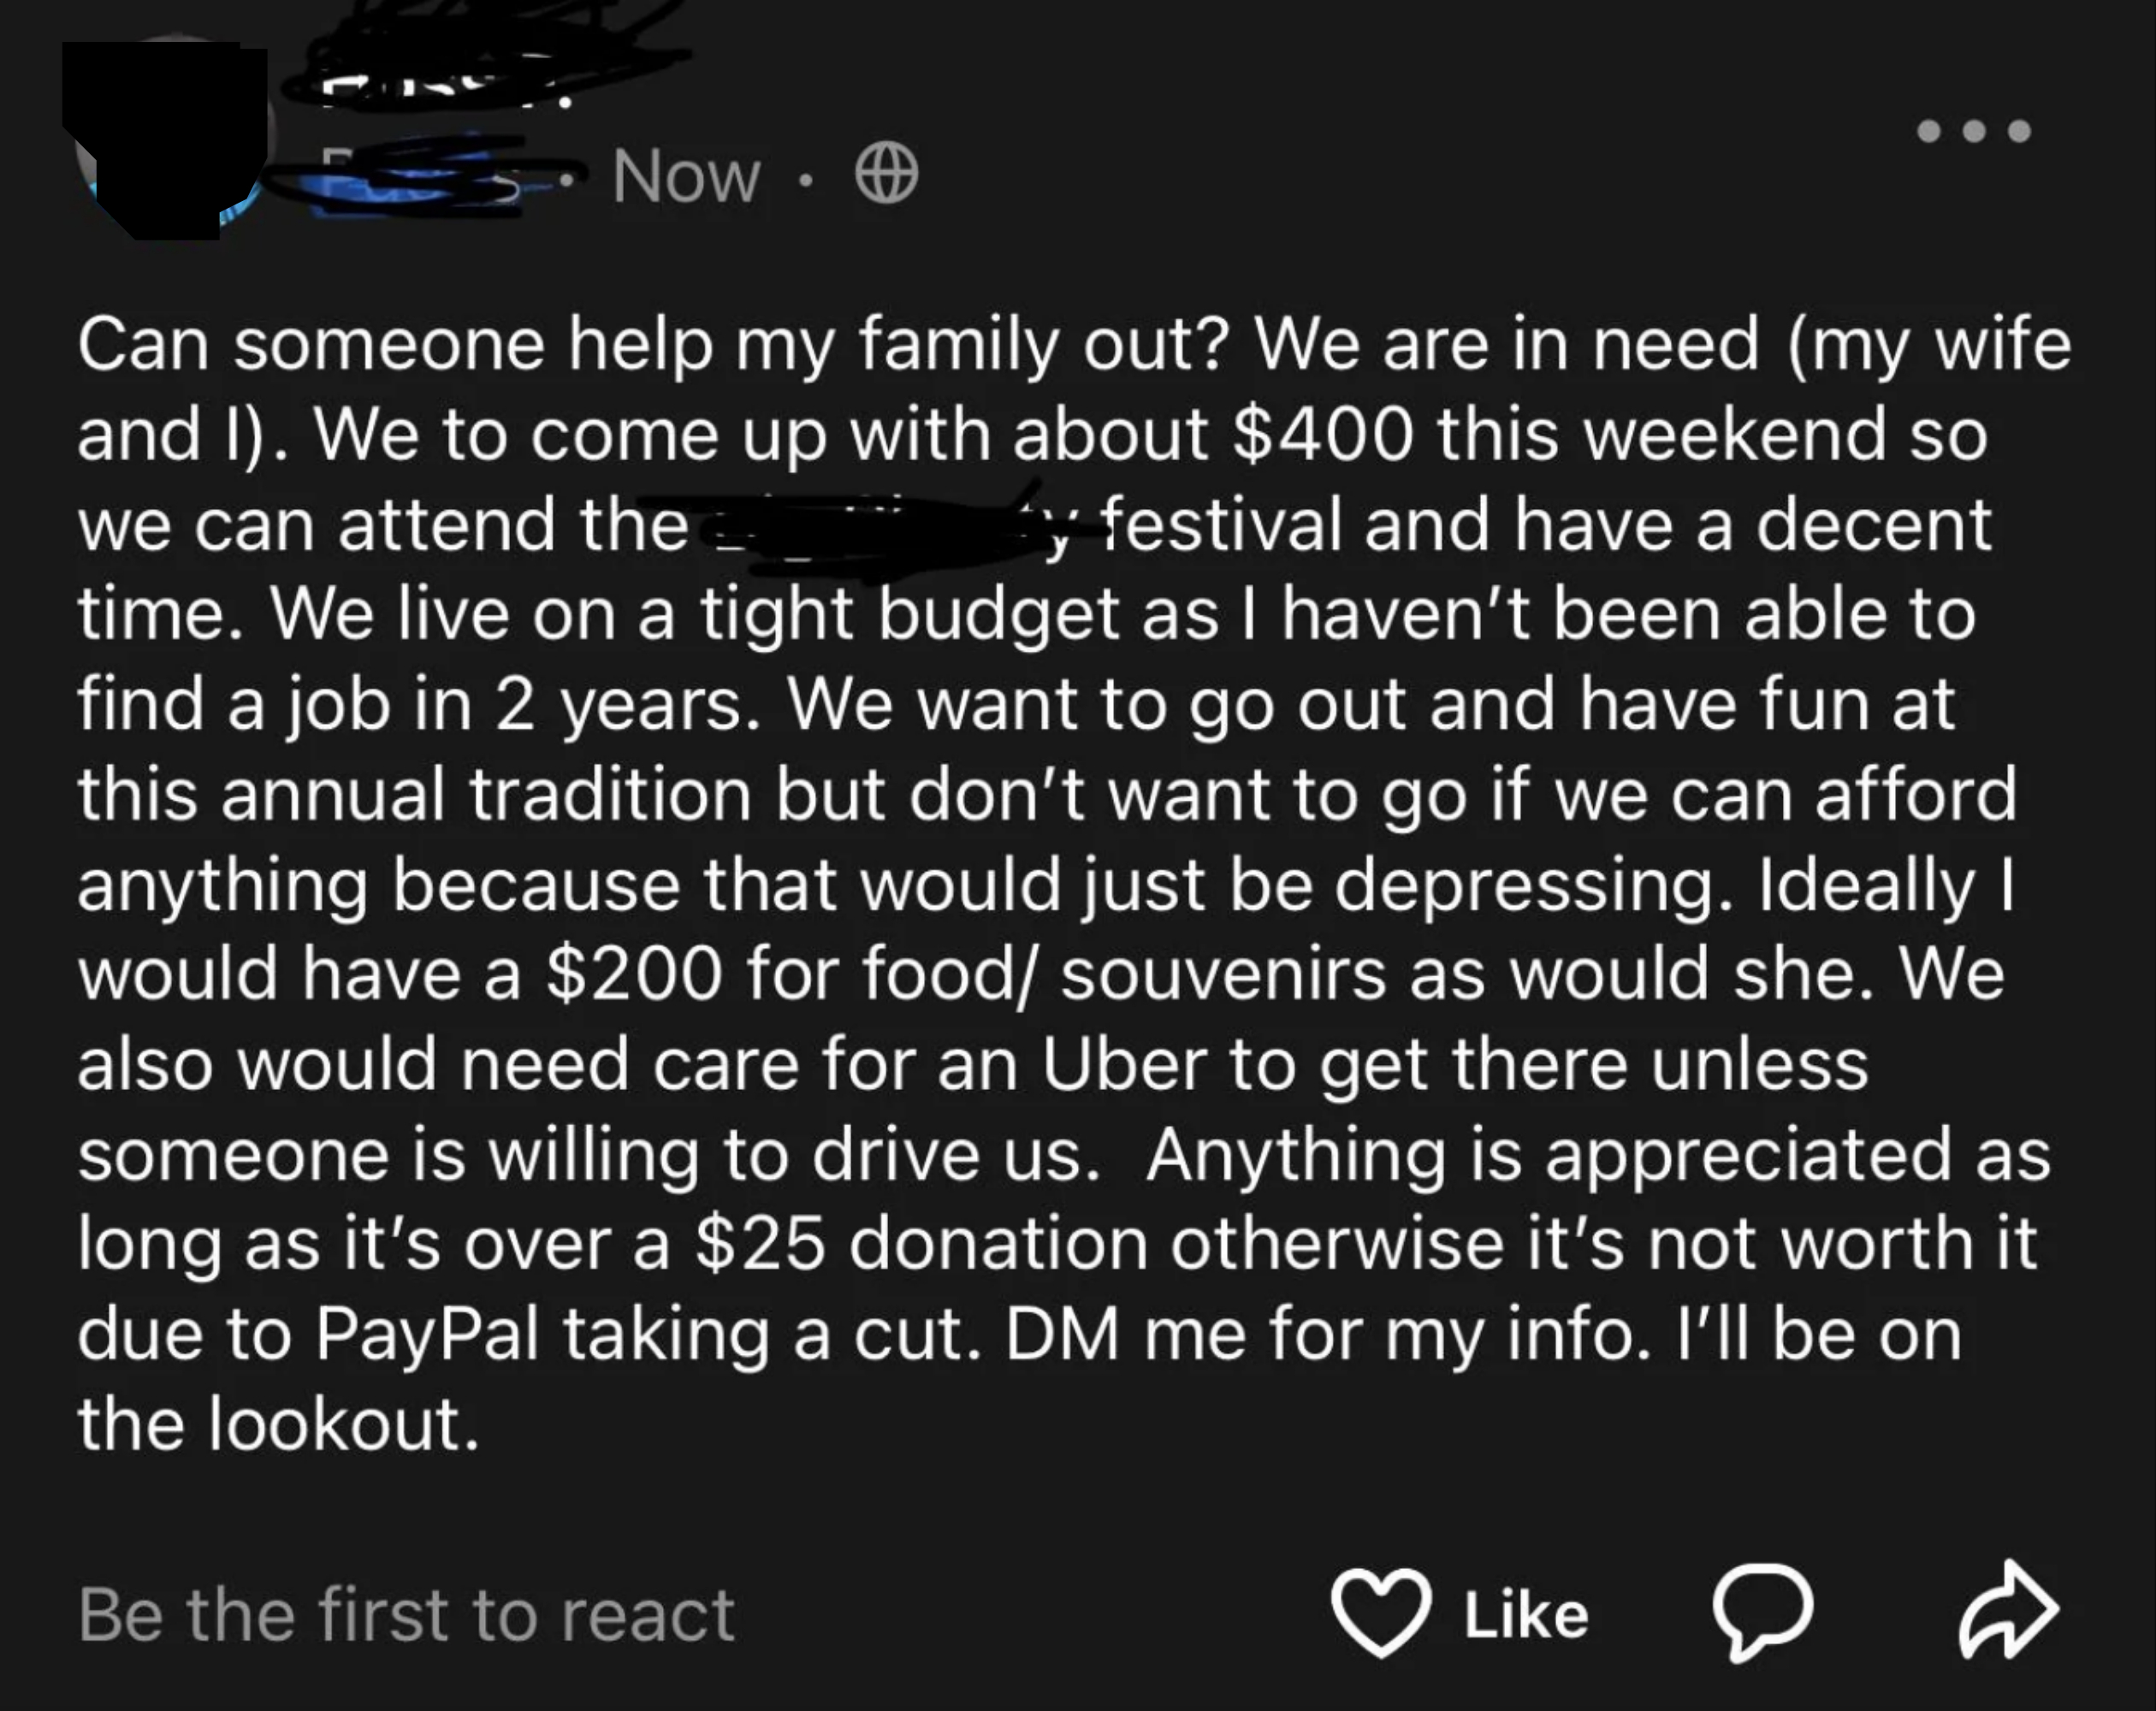 &quot;Can someone help my family out?&quot;